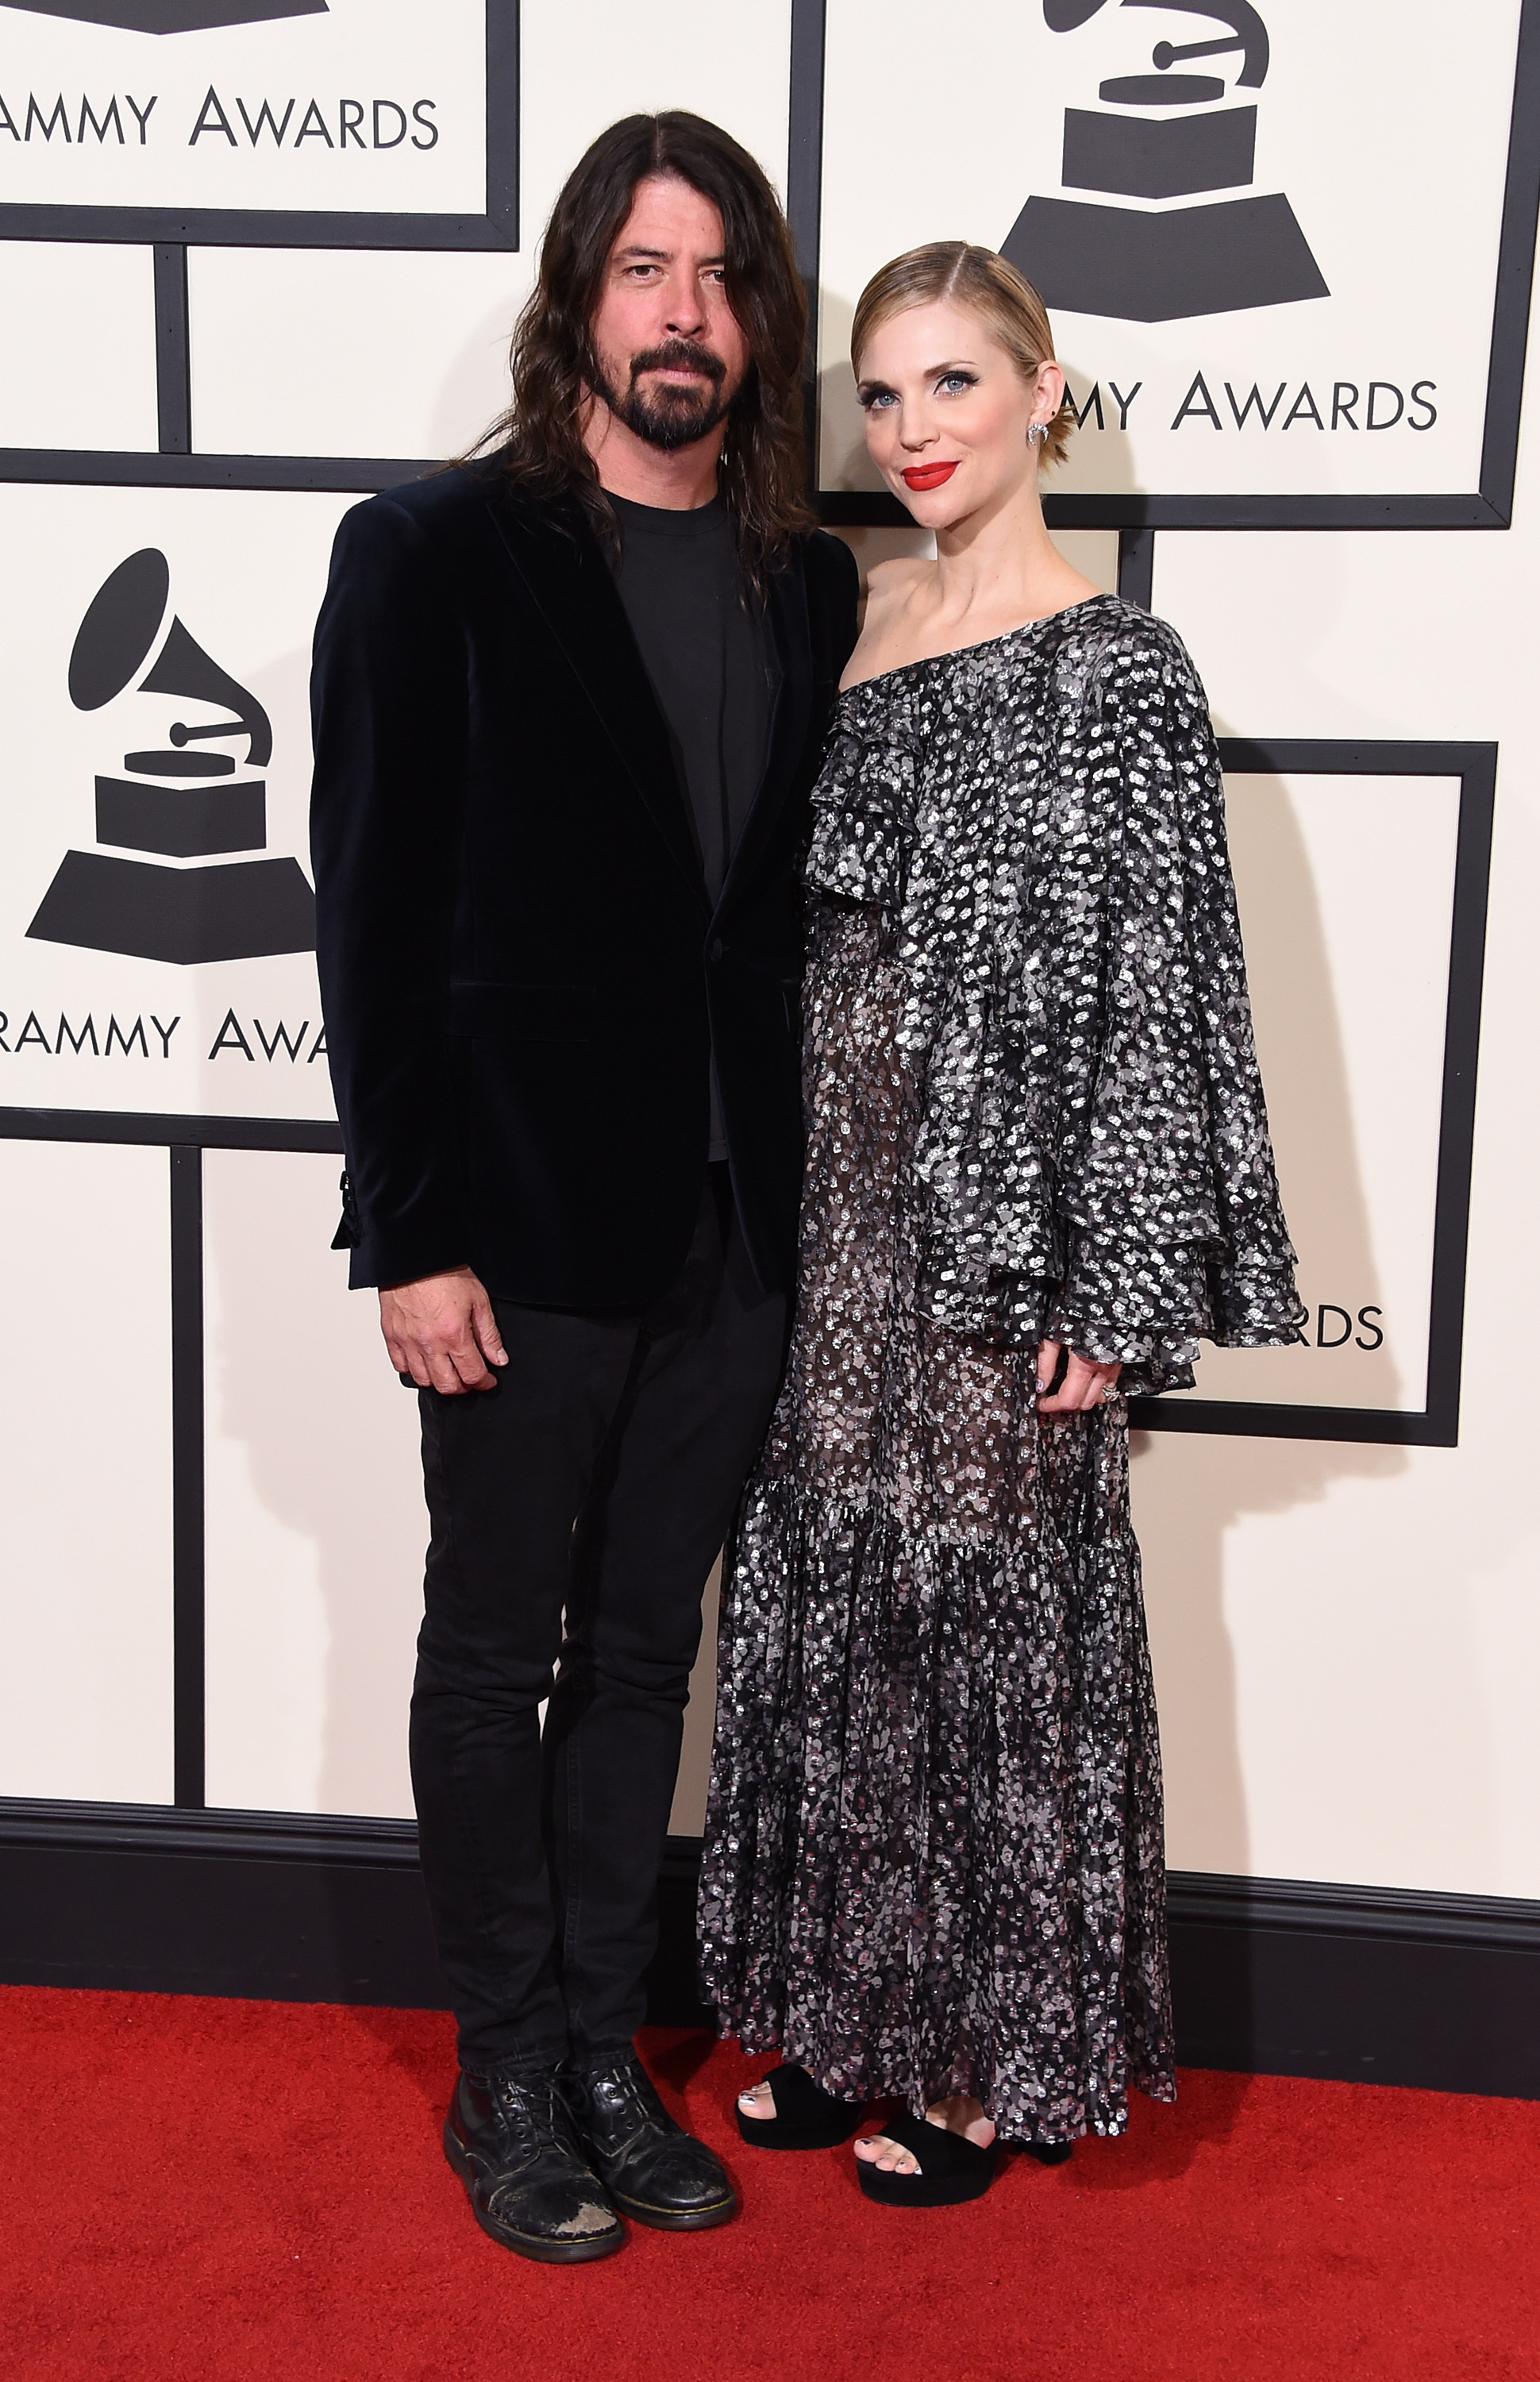 Dave Grohl, left, and Jordyn Blum, right, attend the 58th GRAMMY Awards at Staples Center on Feb. 15, 2016 in Los Angeles.